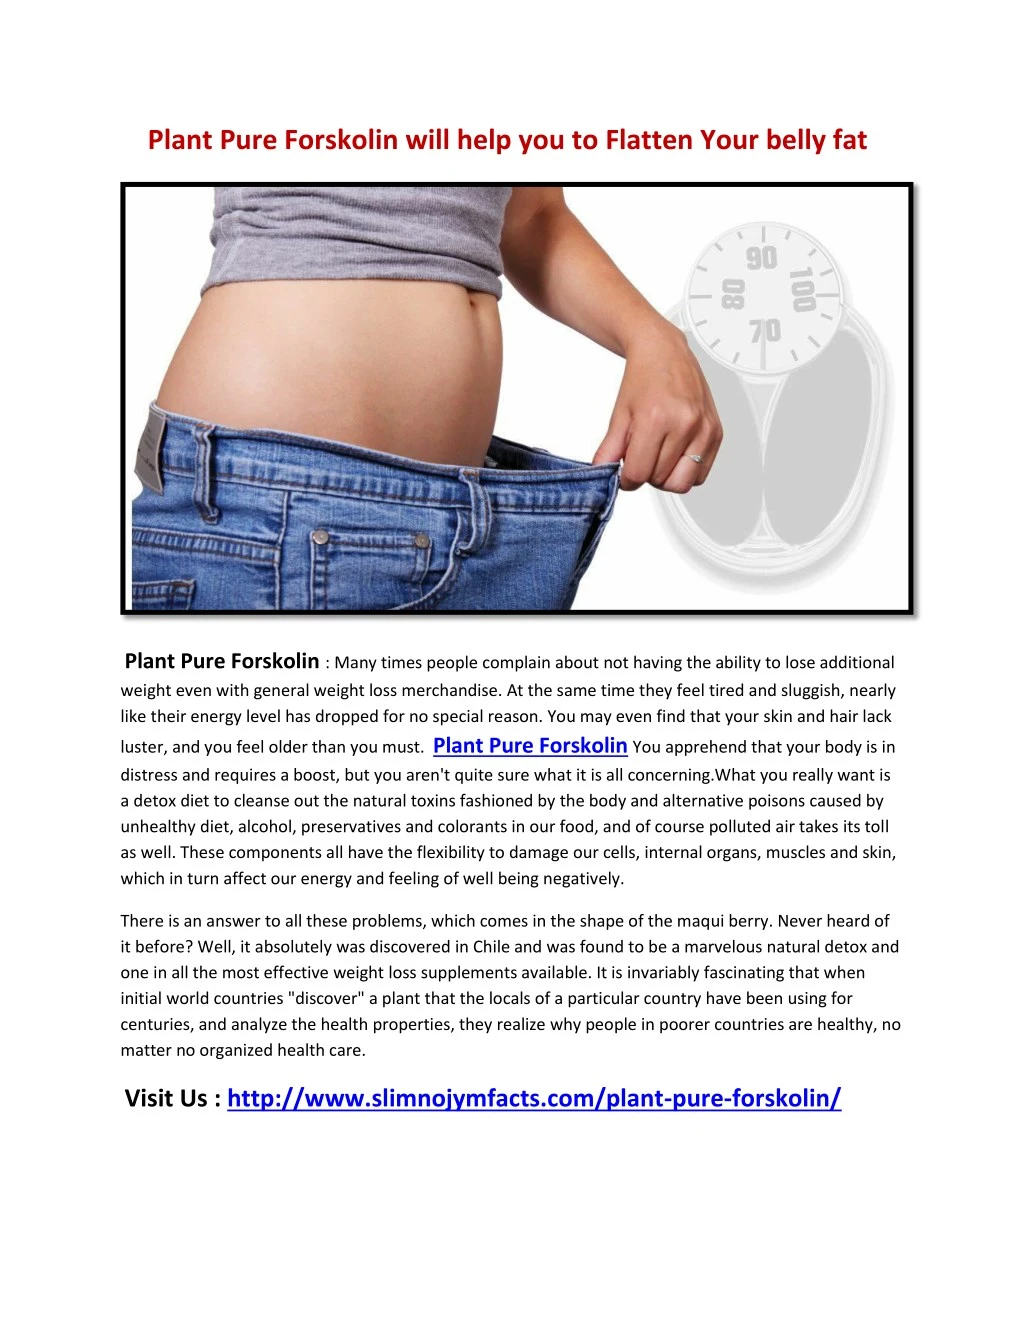 plant pure forskolin will help you to flatten